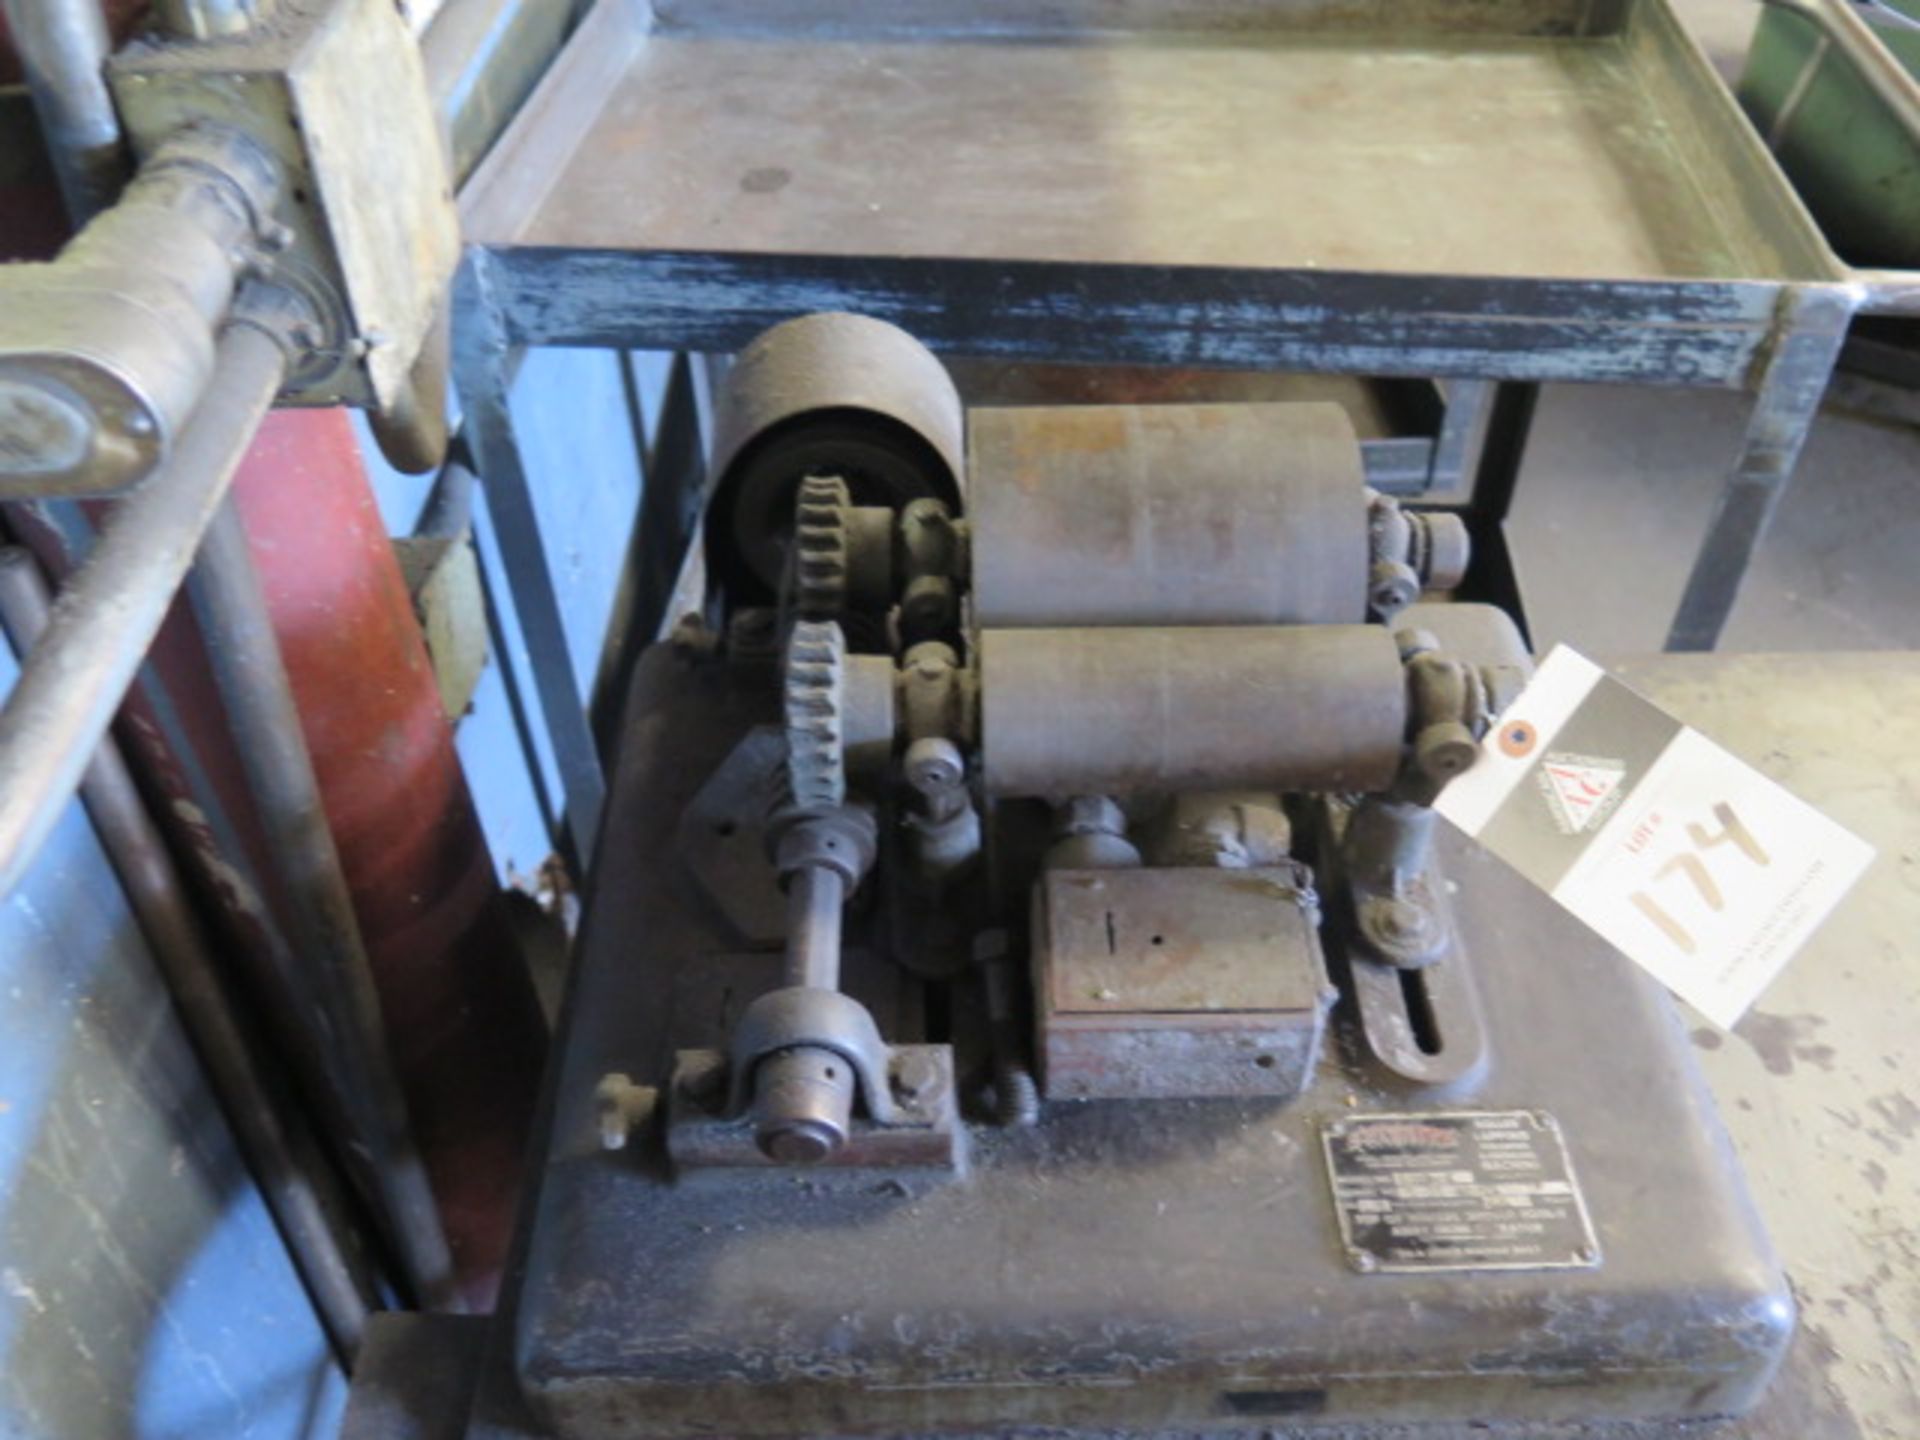 Spitfire mdl. SRD-6 Roller Lapping Polishing and Grinding Machine (SOLD AS-IS - NO WARRANTY) - Image 2 of 6